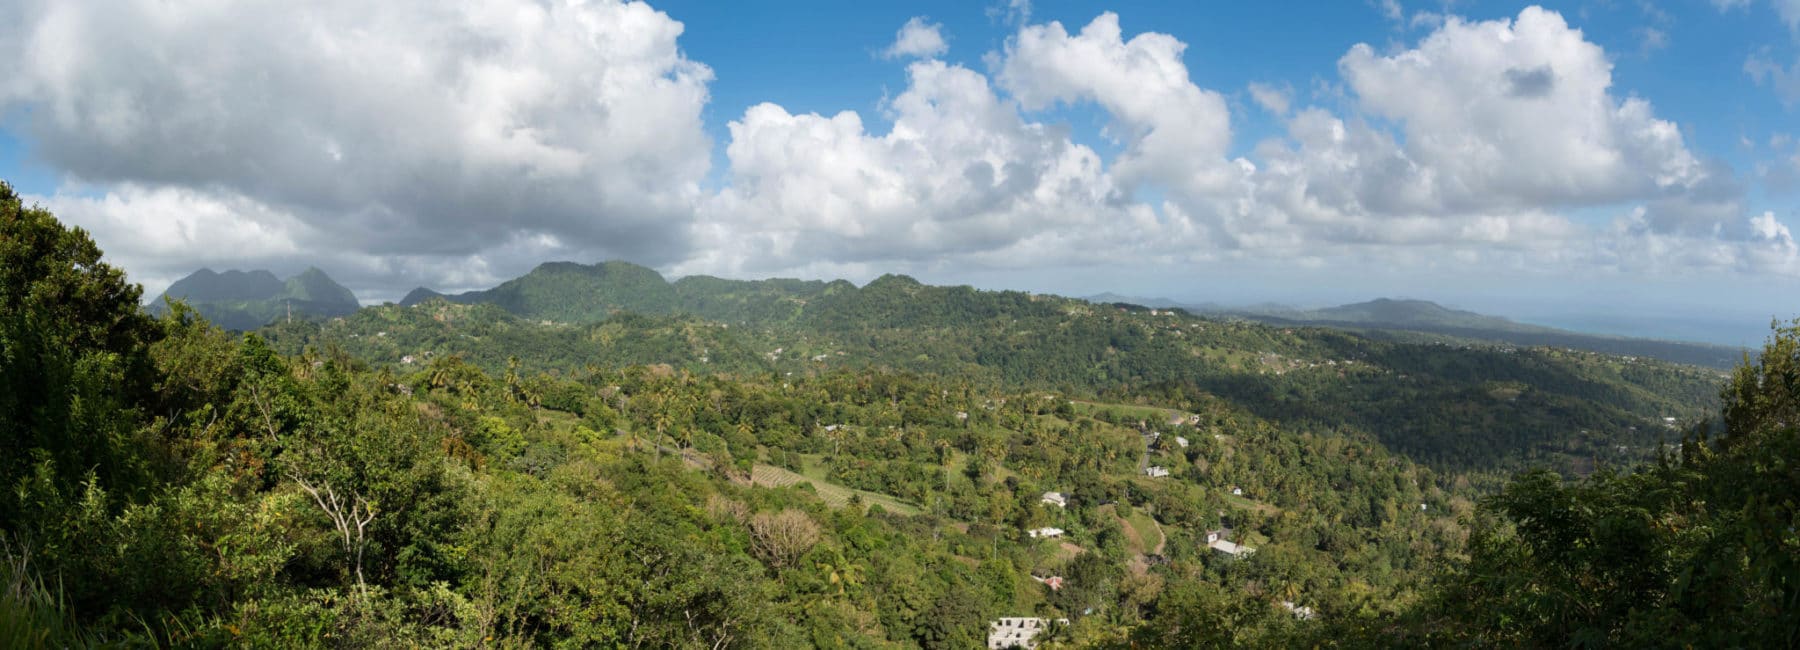 View from Tet Paul Nature Trail in St. Lucia